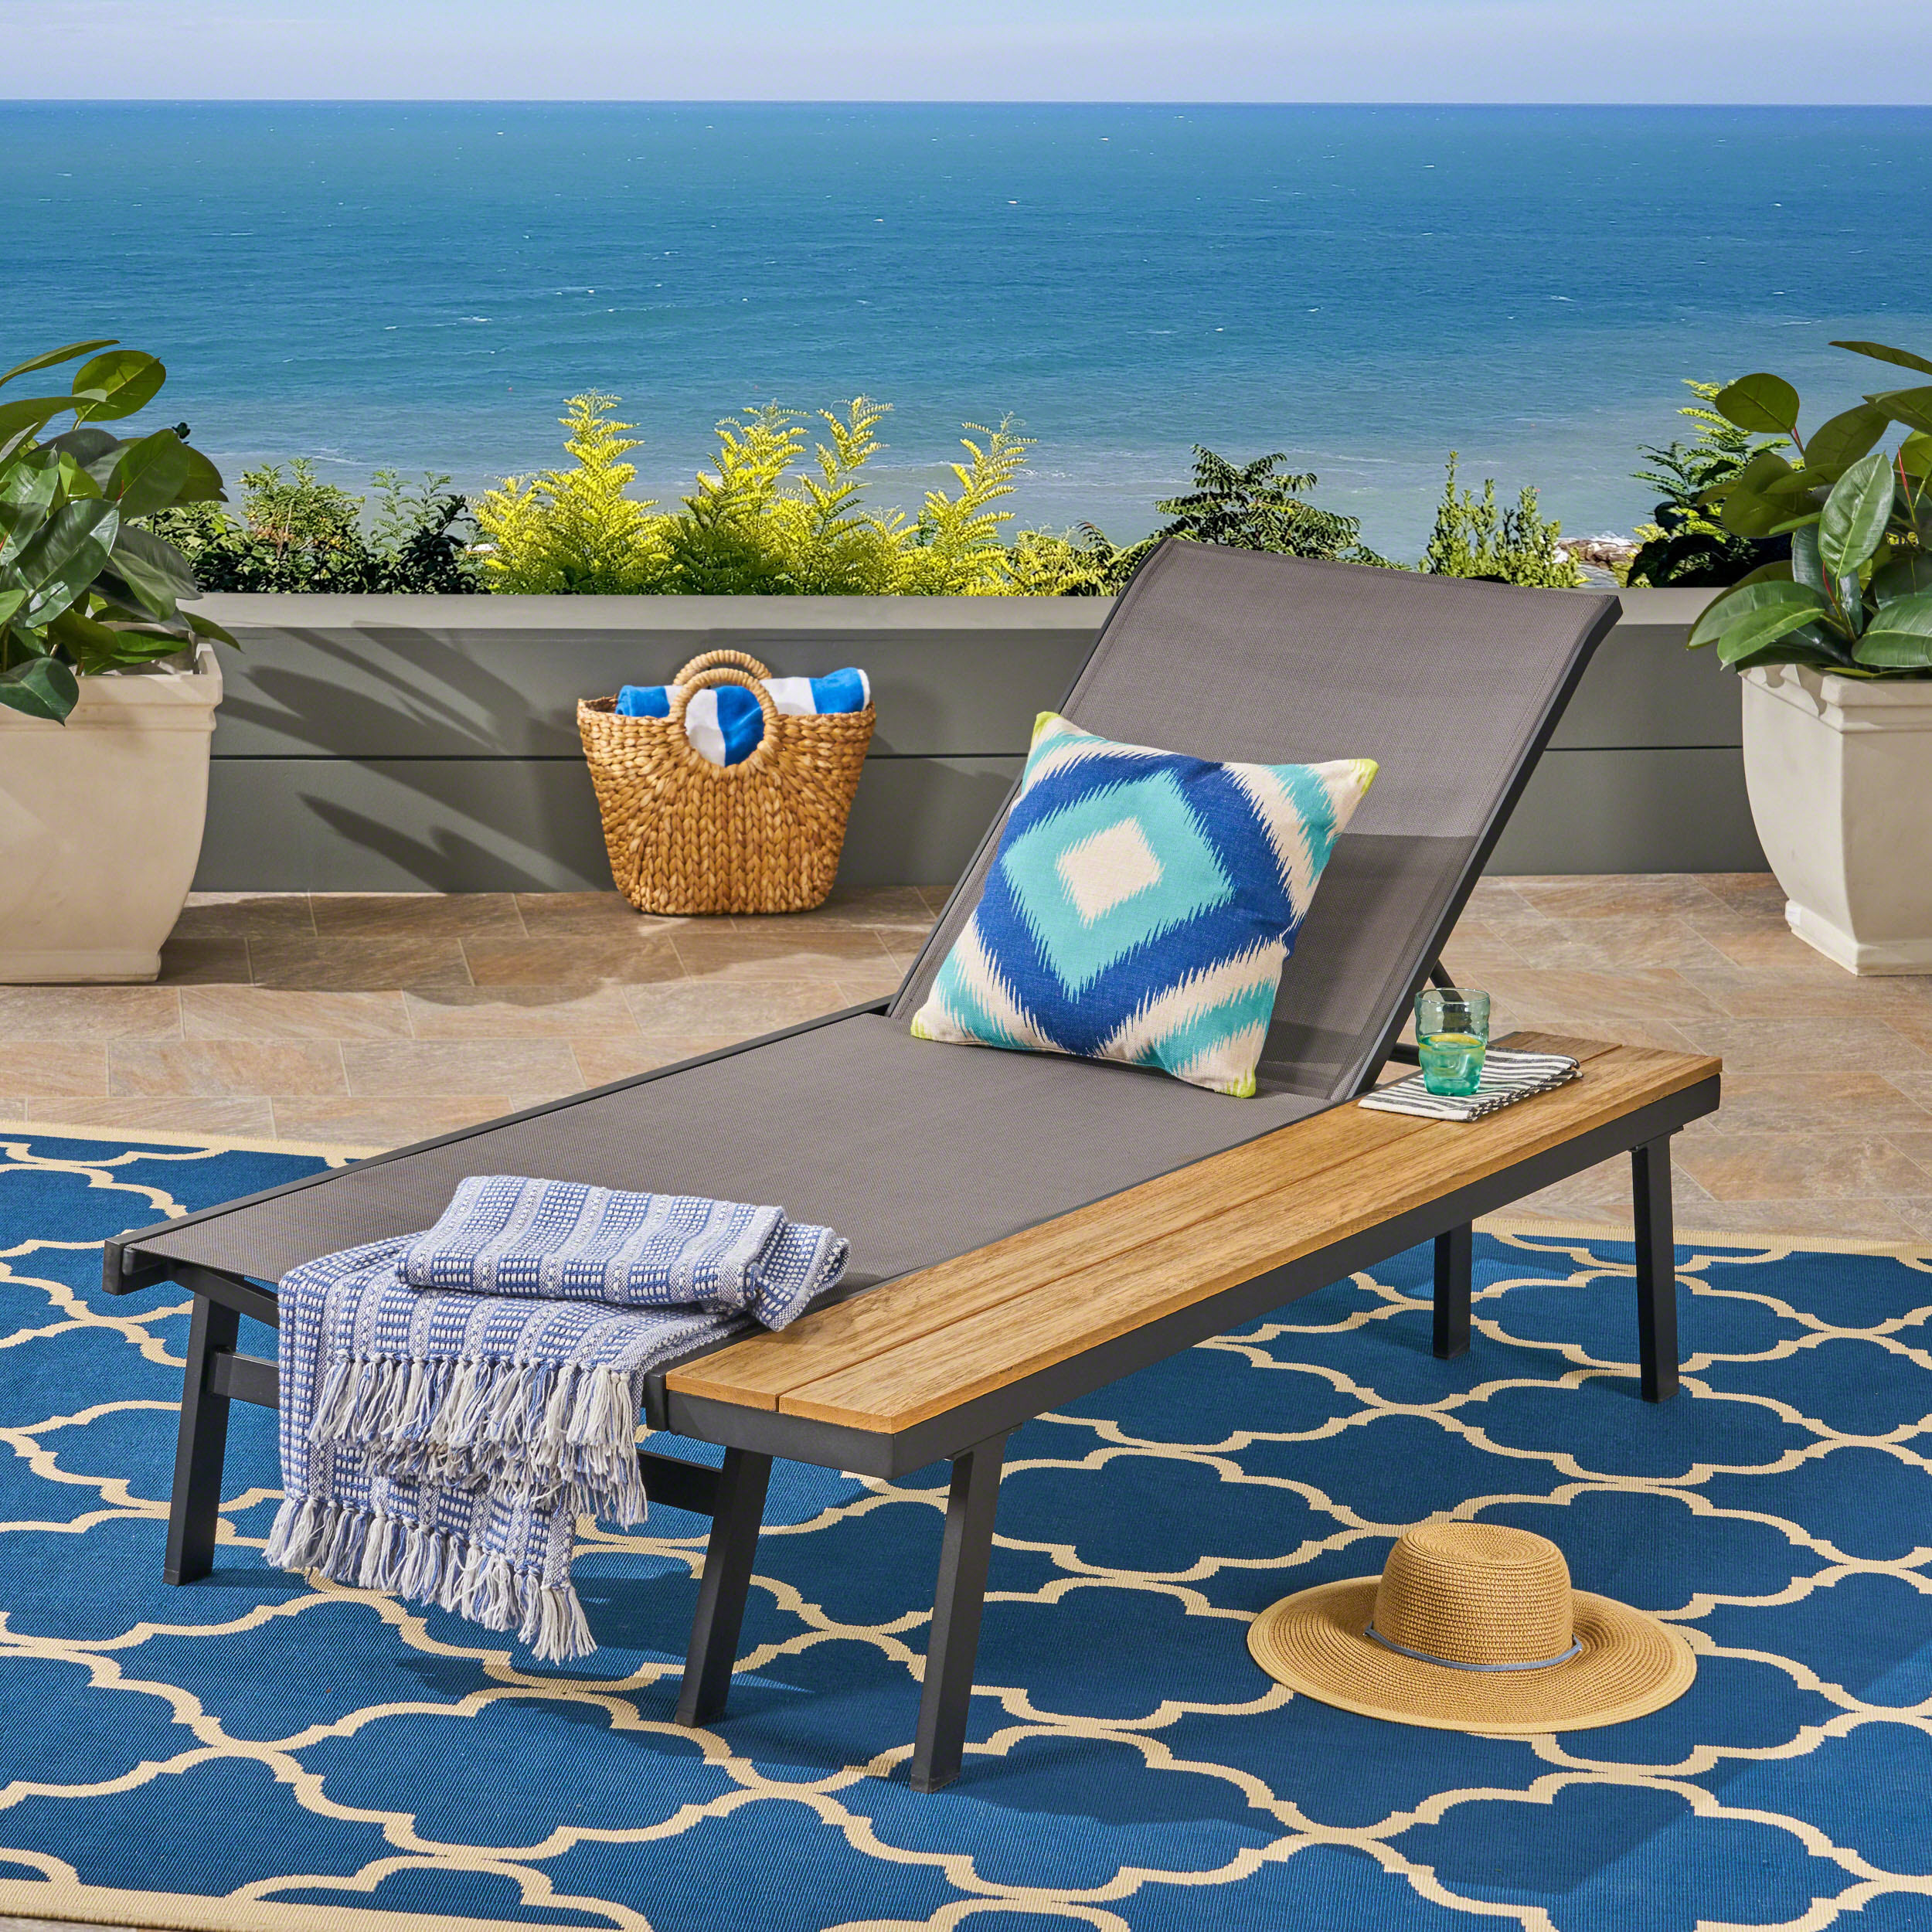 Killian Outdoor Mesh and Aluminum Chaise Lounge with Side Table, Gray - image 1 of 7